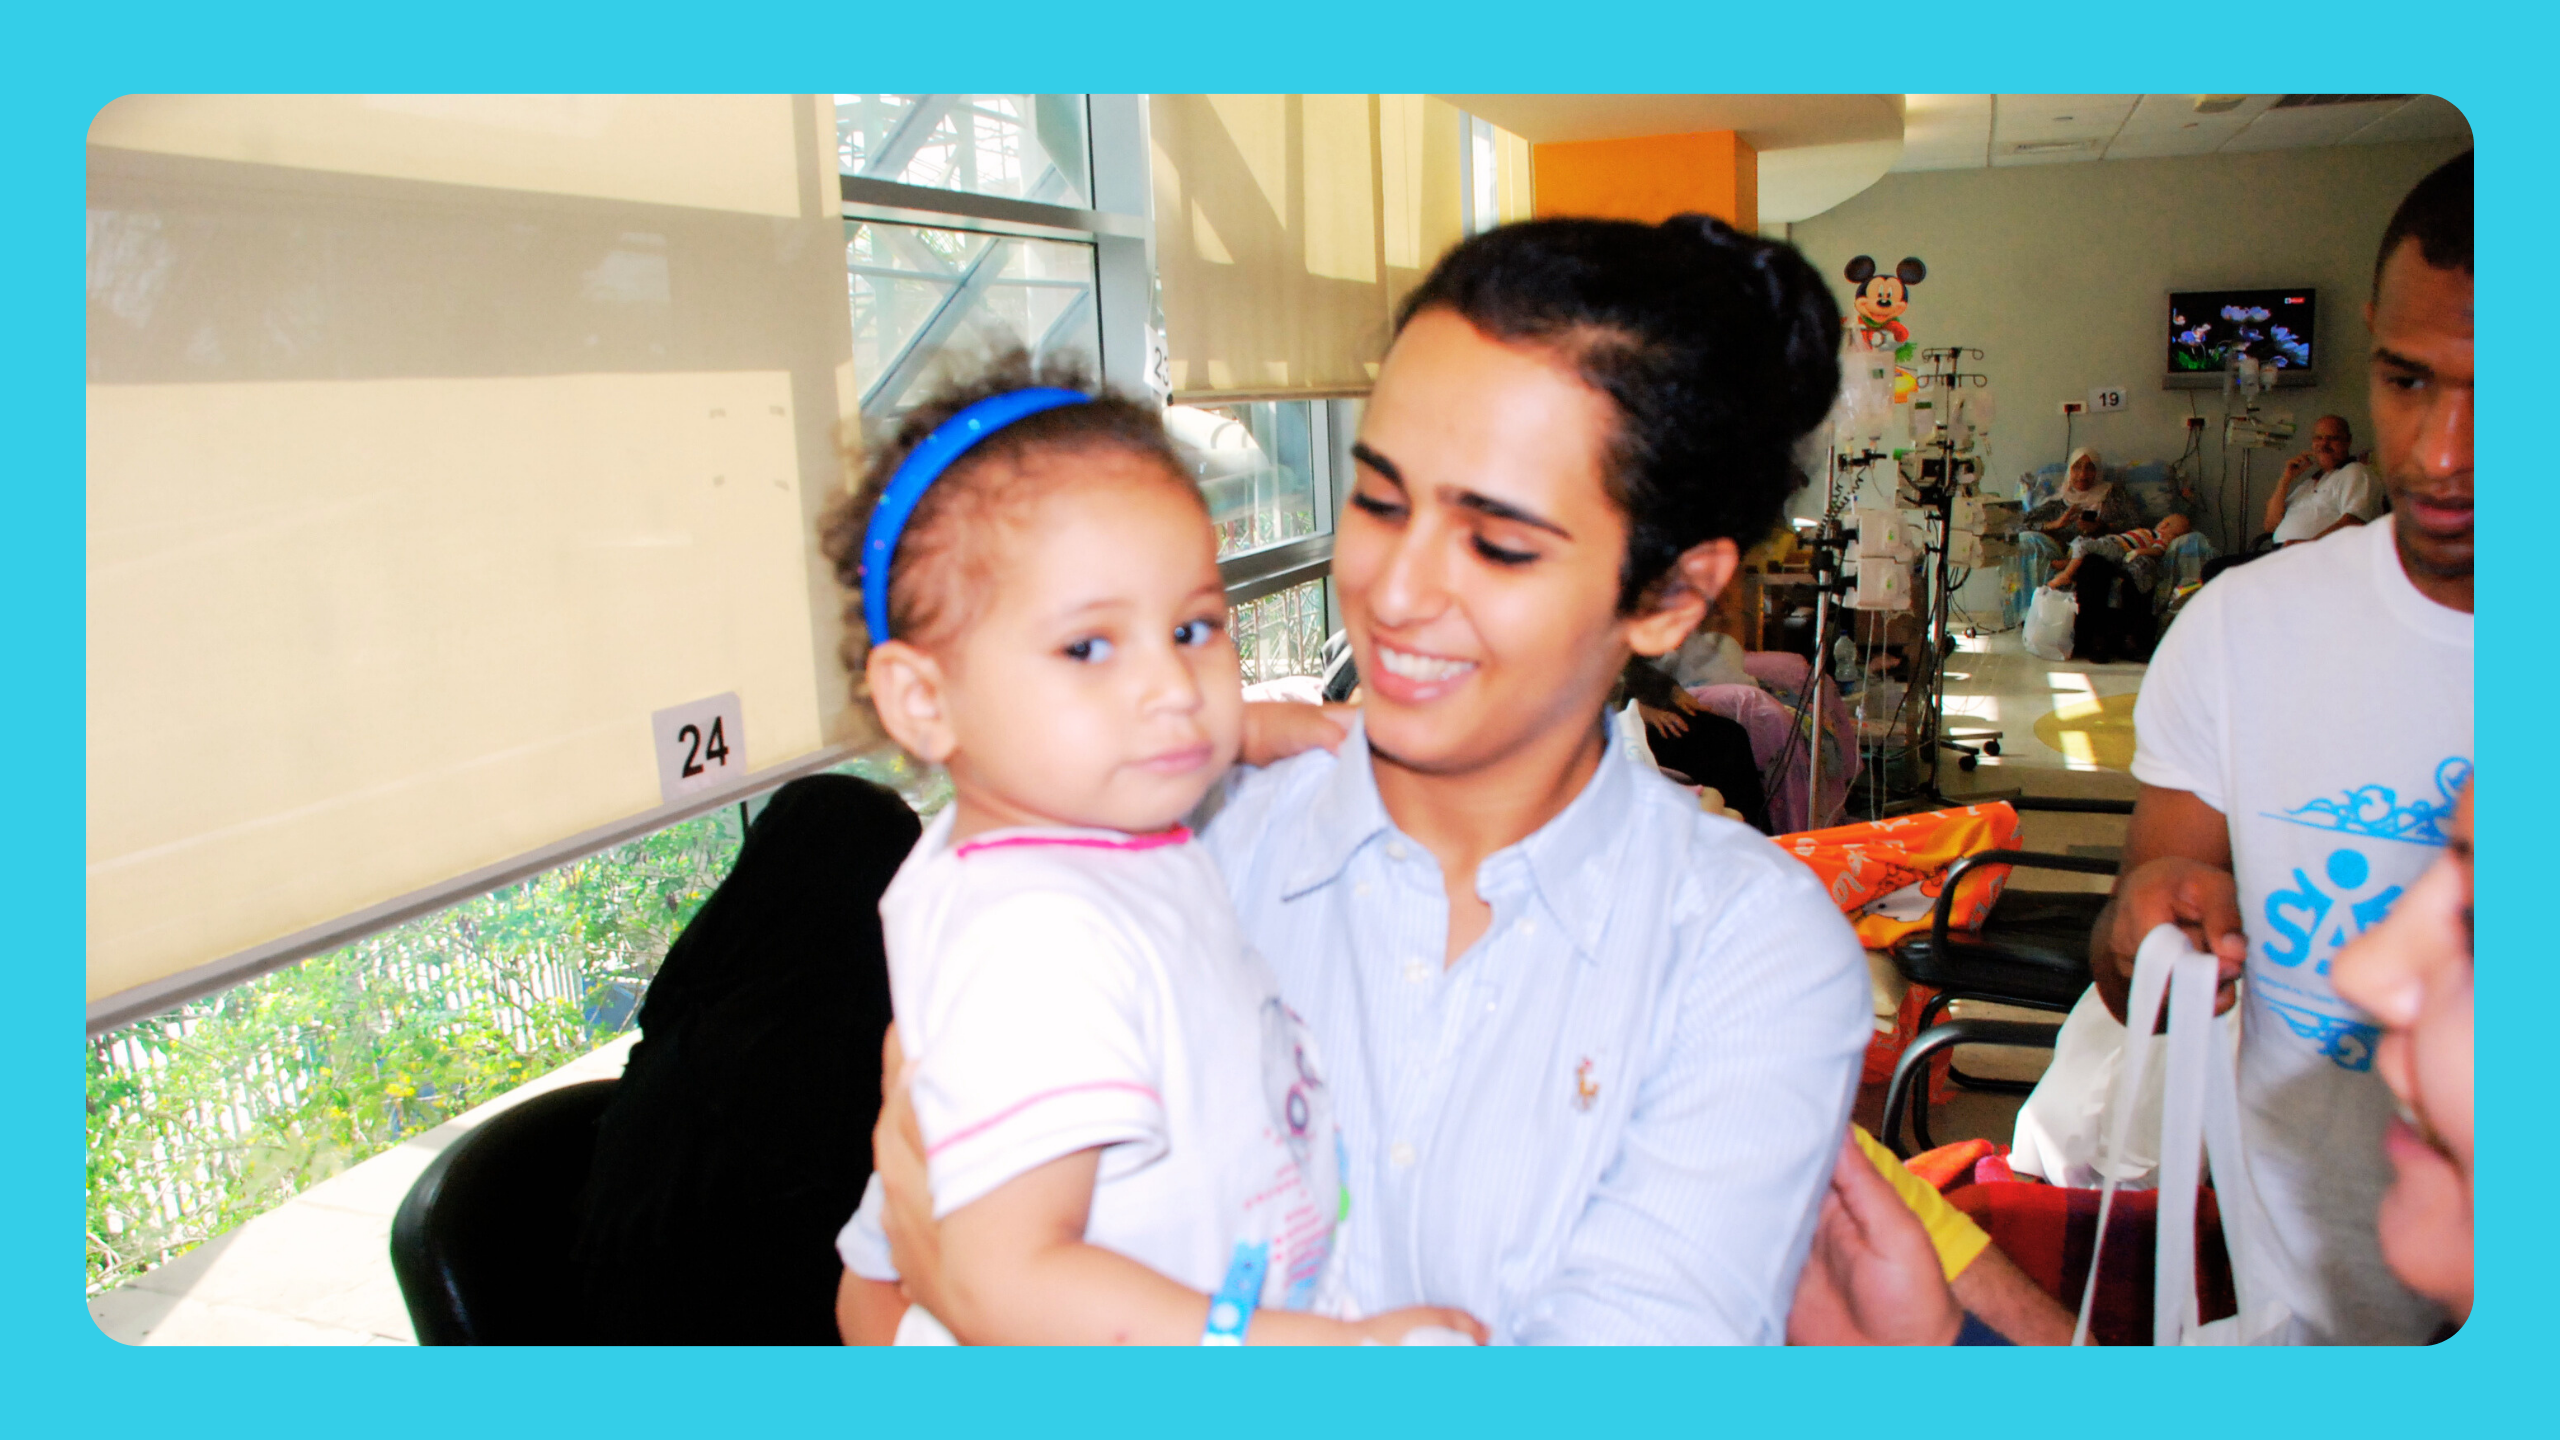 Sheikha Al Thani Children's Cancer Hospital 57357 2nd visit to donate to their 300-bed project (4)